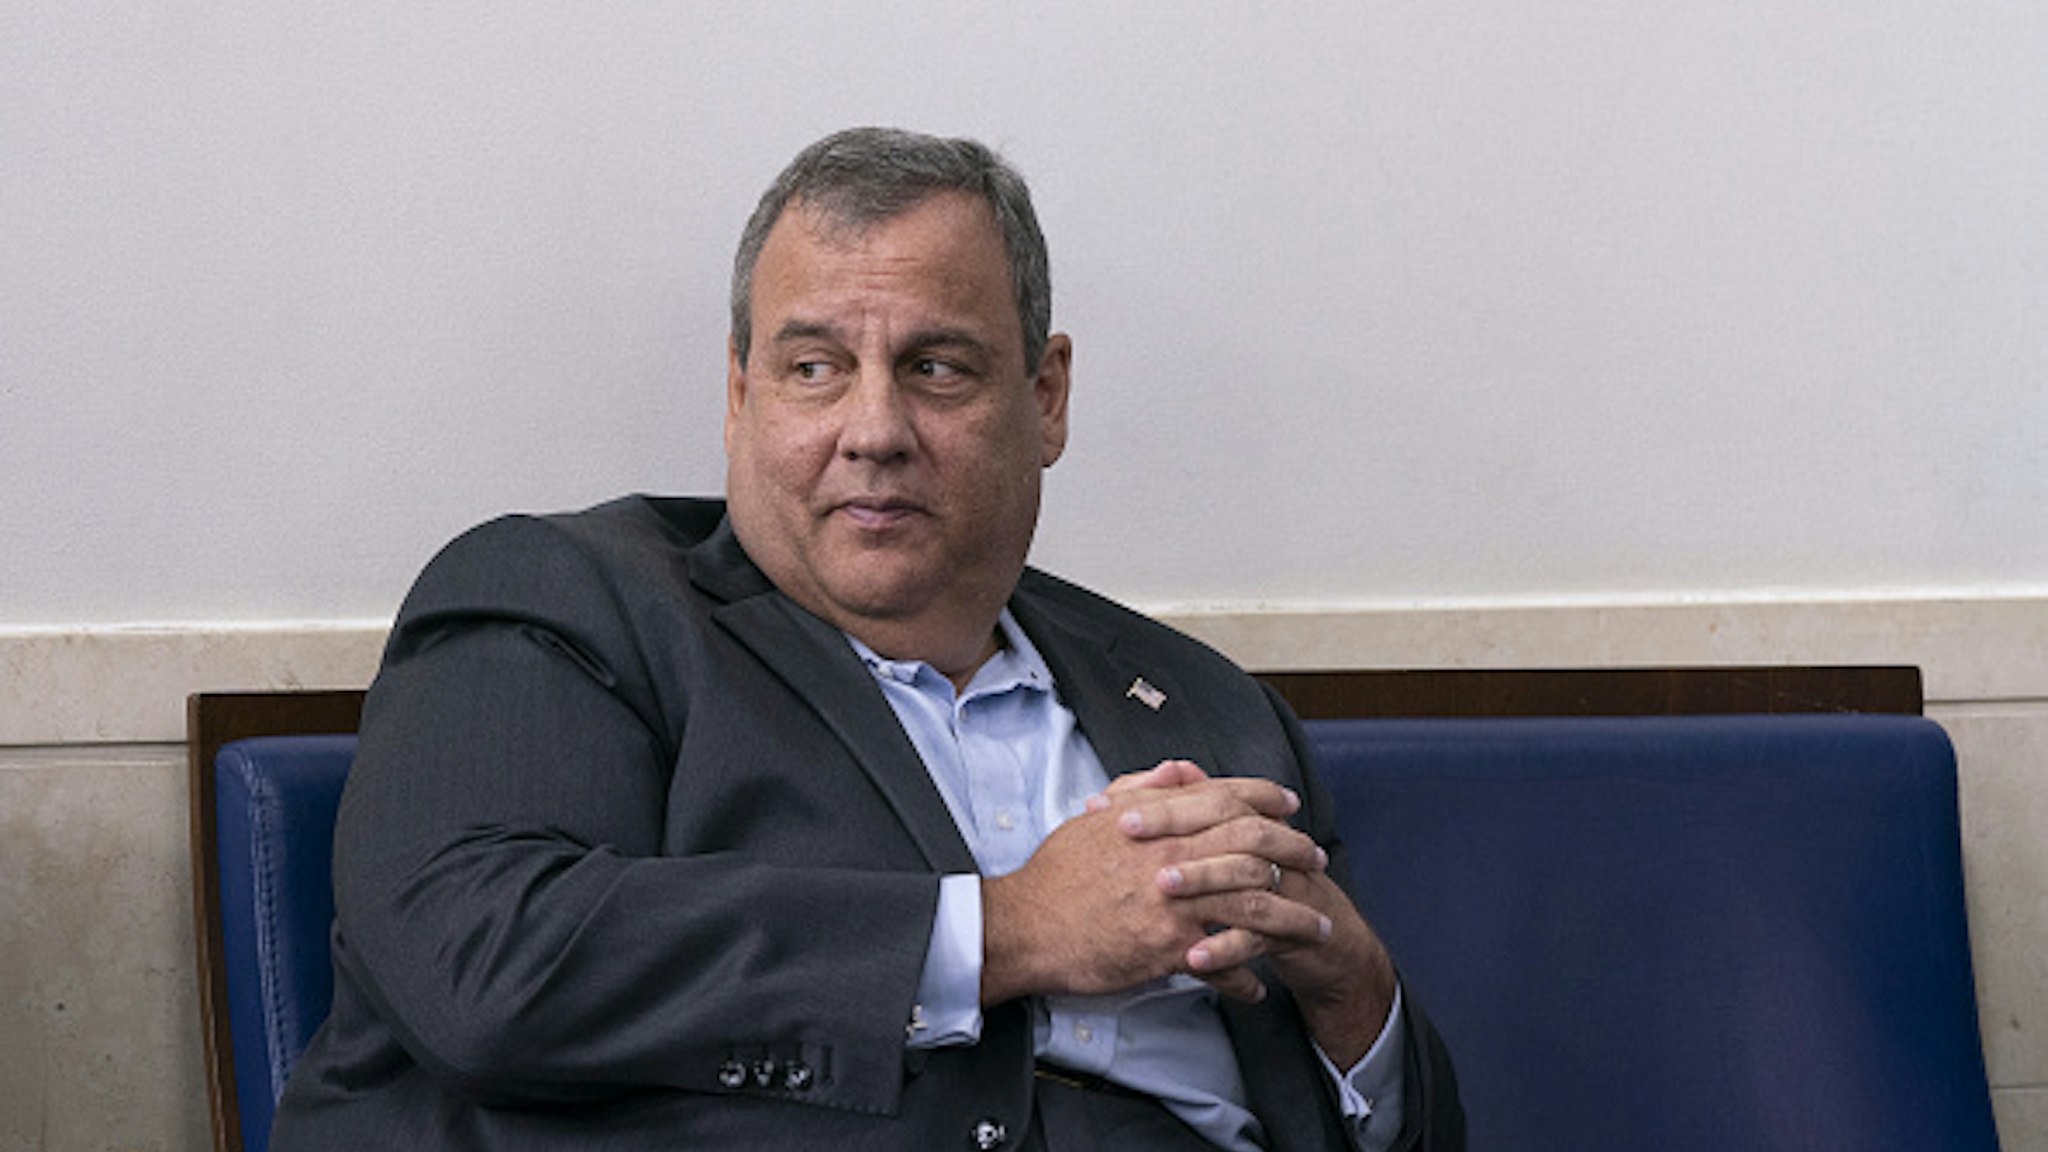 Chris Christie, former Governor of New Jersey, listens as U.S. President Donald Trump speaks during a news conference in the James S. Brady Press Briefing Room at the White House in Washington, D.C., U.S., on Sunday, Sept. 27, 2020. Trump denied a report that he paid just $750 in federal income taxes in 2016 and 2017, and repeated his stance to only share his tax returns after an audit is finished.